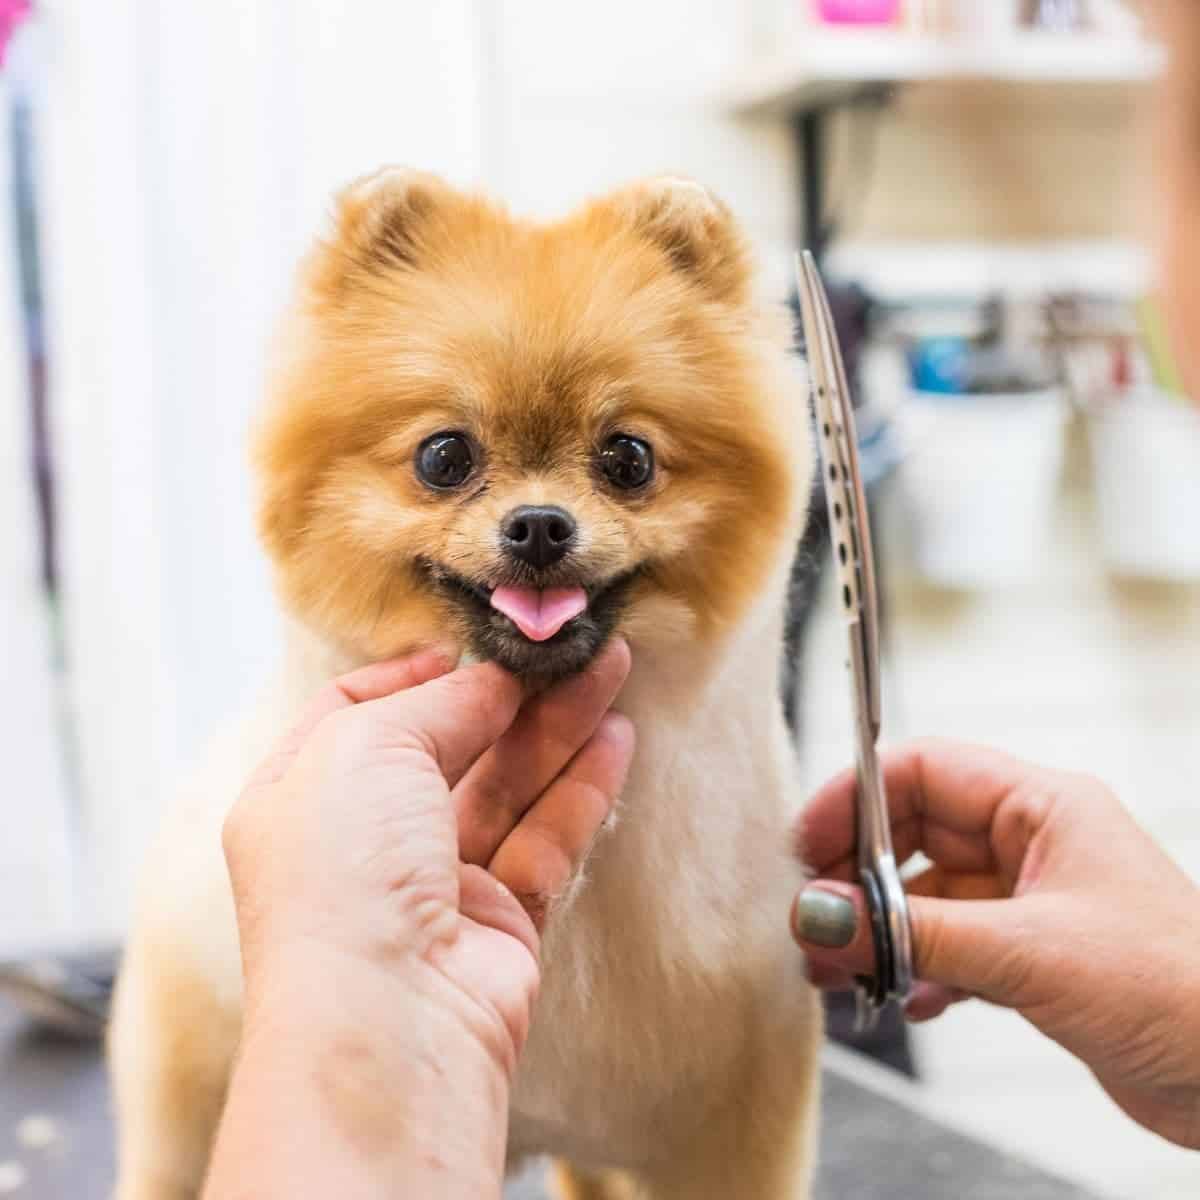 make money working with dogs as a dog groomer